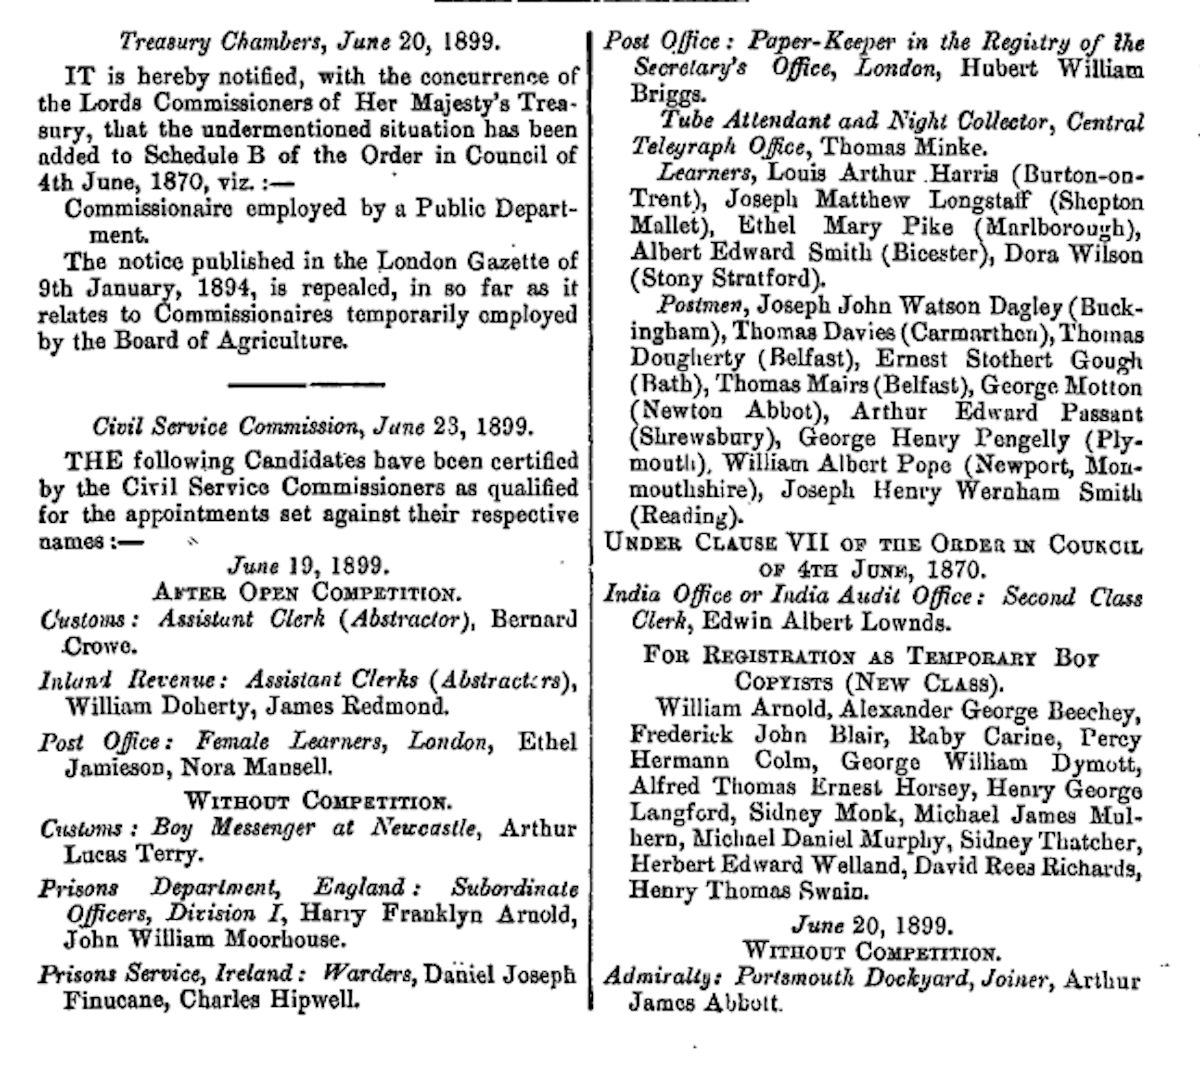 An 1899 page from the civil service records